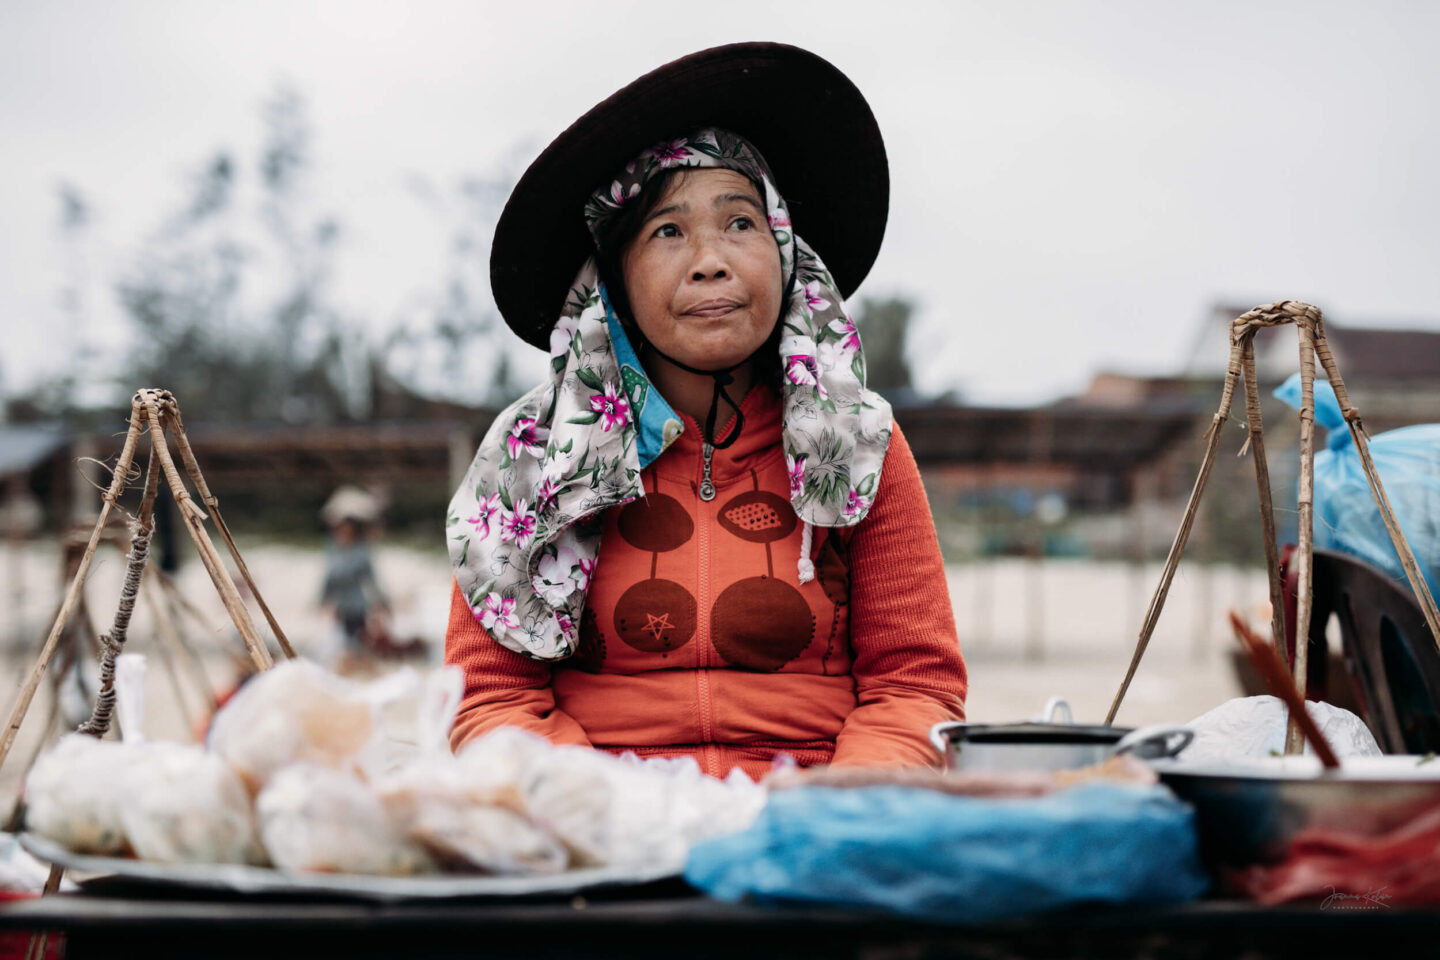   A woman sells seafood in a coastal fishing village near Hoi An, Central Vietnam.